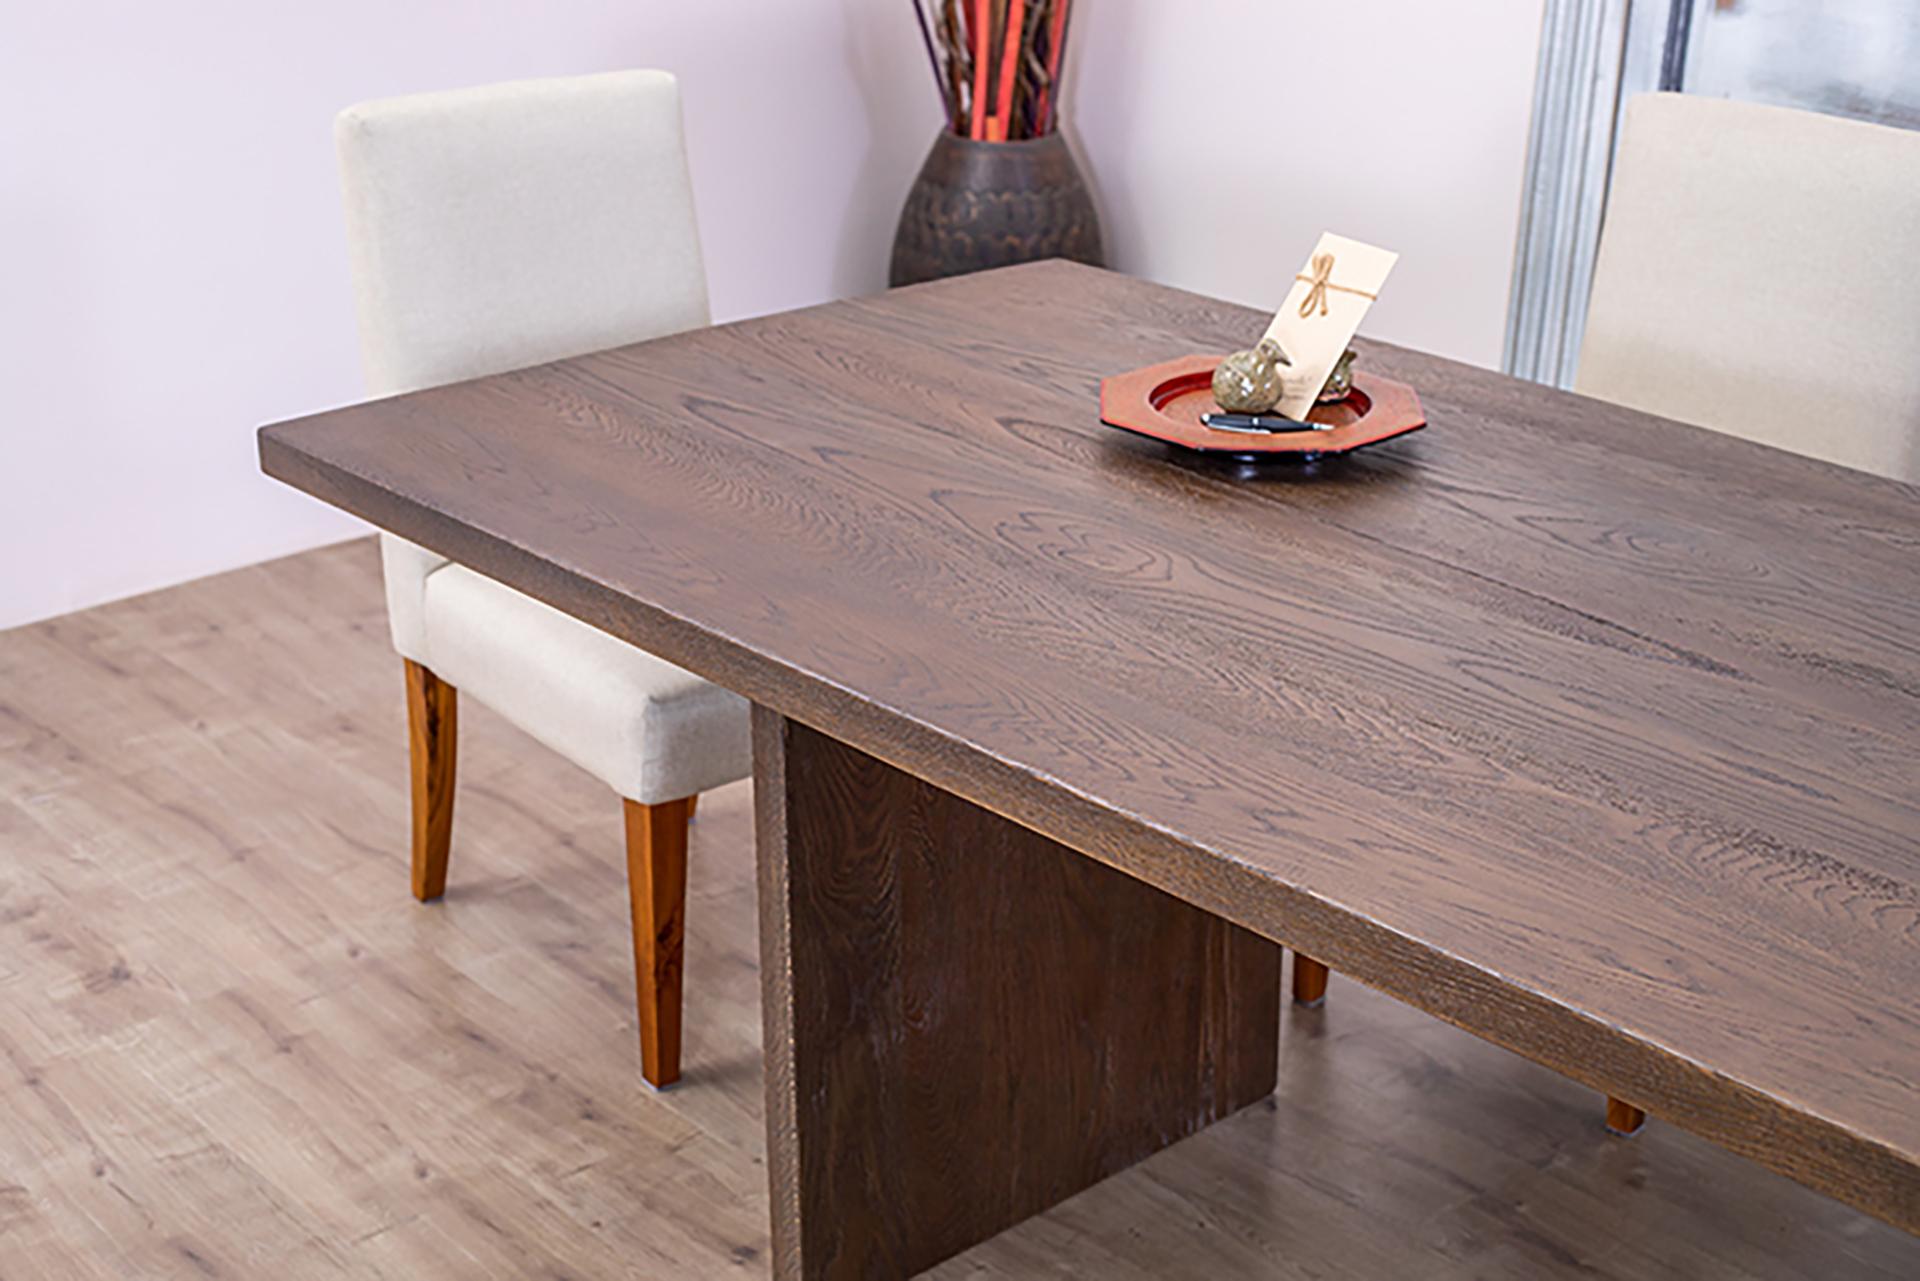 This handcrafted solid oak dining table is a masterpiece of timeless beauty and exceptional craftsmanship. Made from solid North American oak, this dining table showcases the natural elegance and durability of this exquisite hardwood.

Each table is